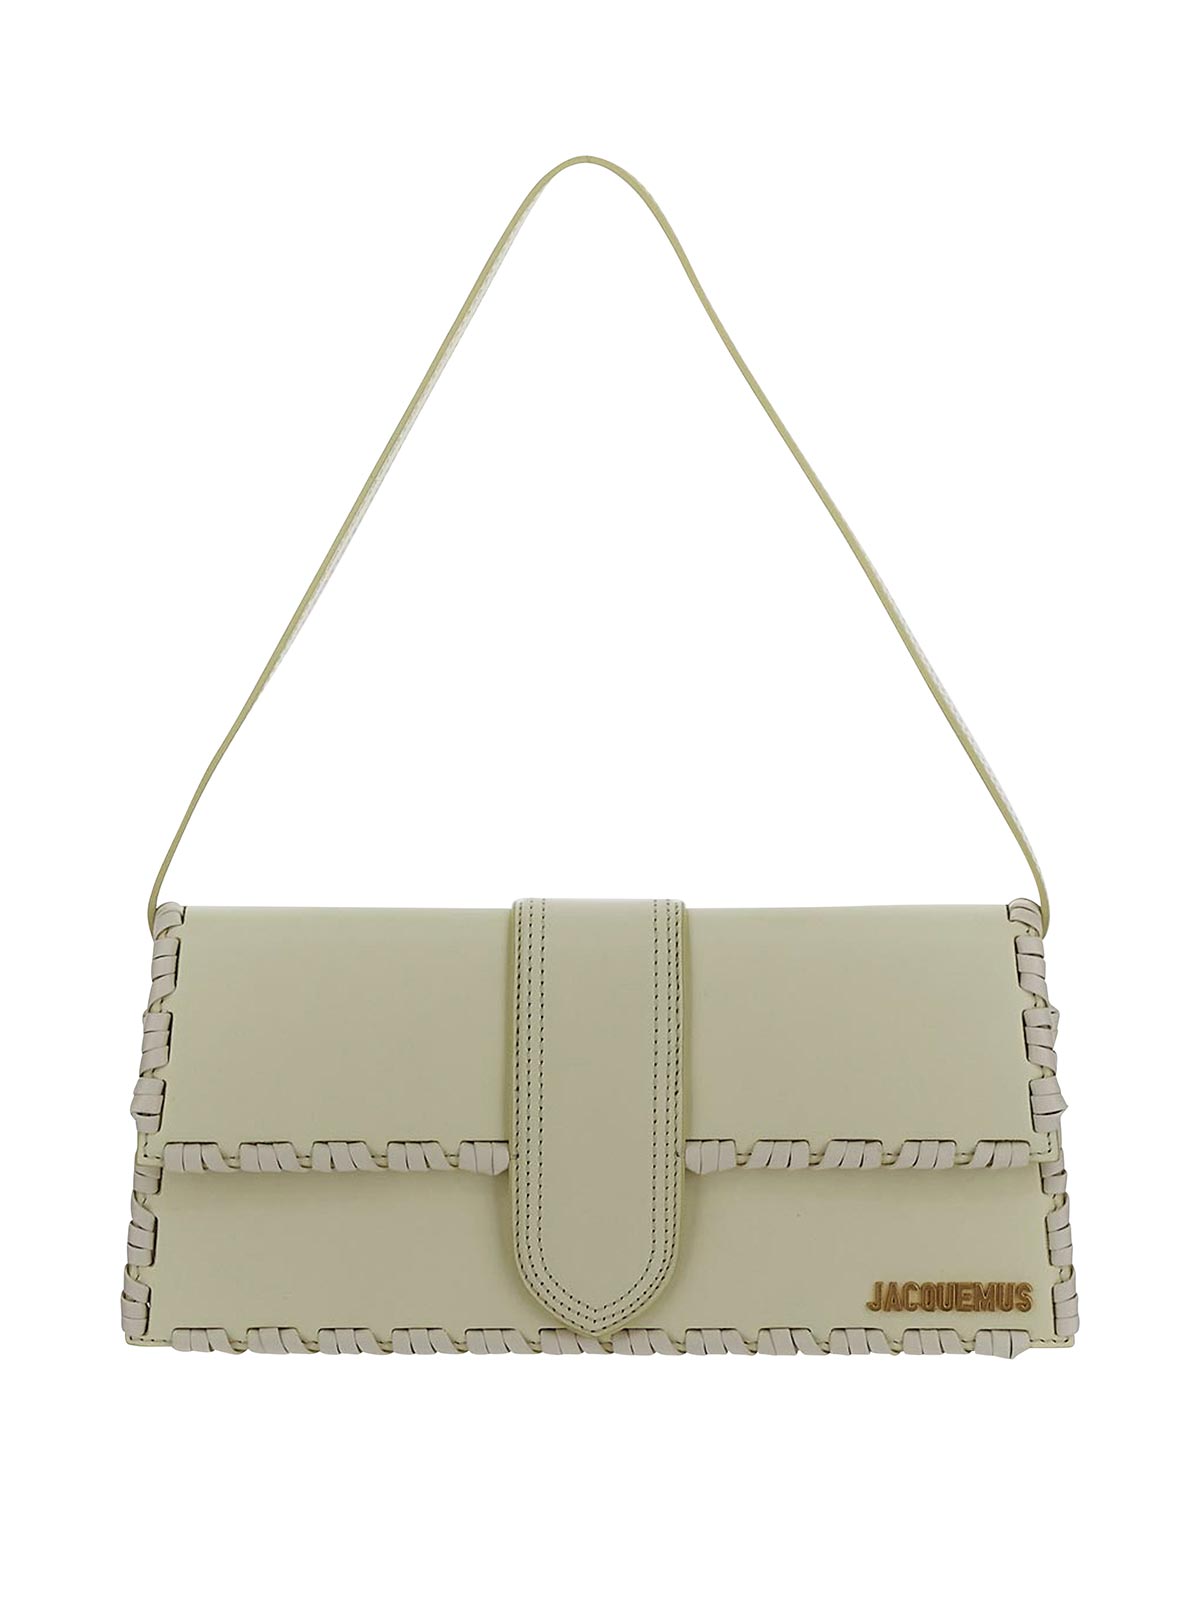 Jacquemus Handbag In Light Yellow With Braided Edges In Gray